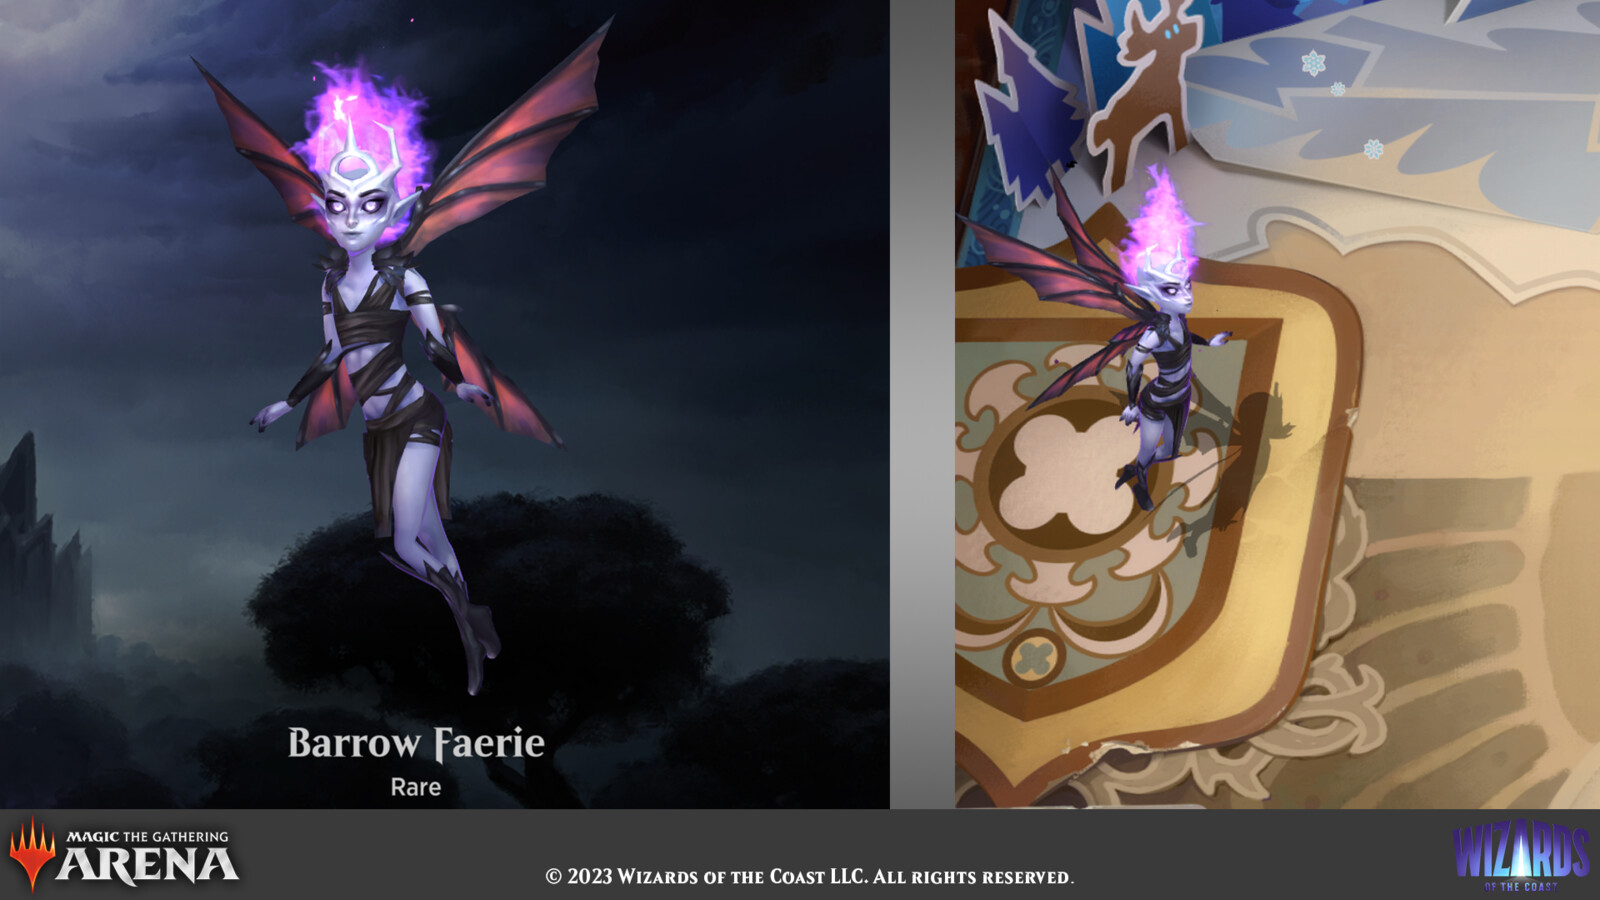 Select companion and game views for the Barrow Faerie